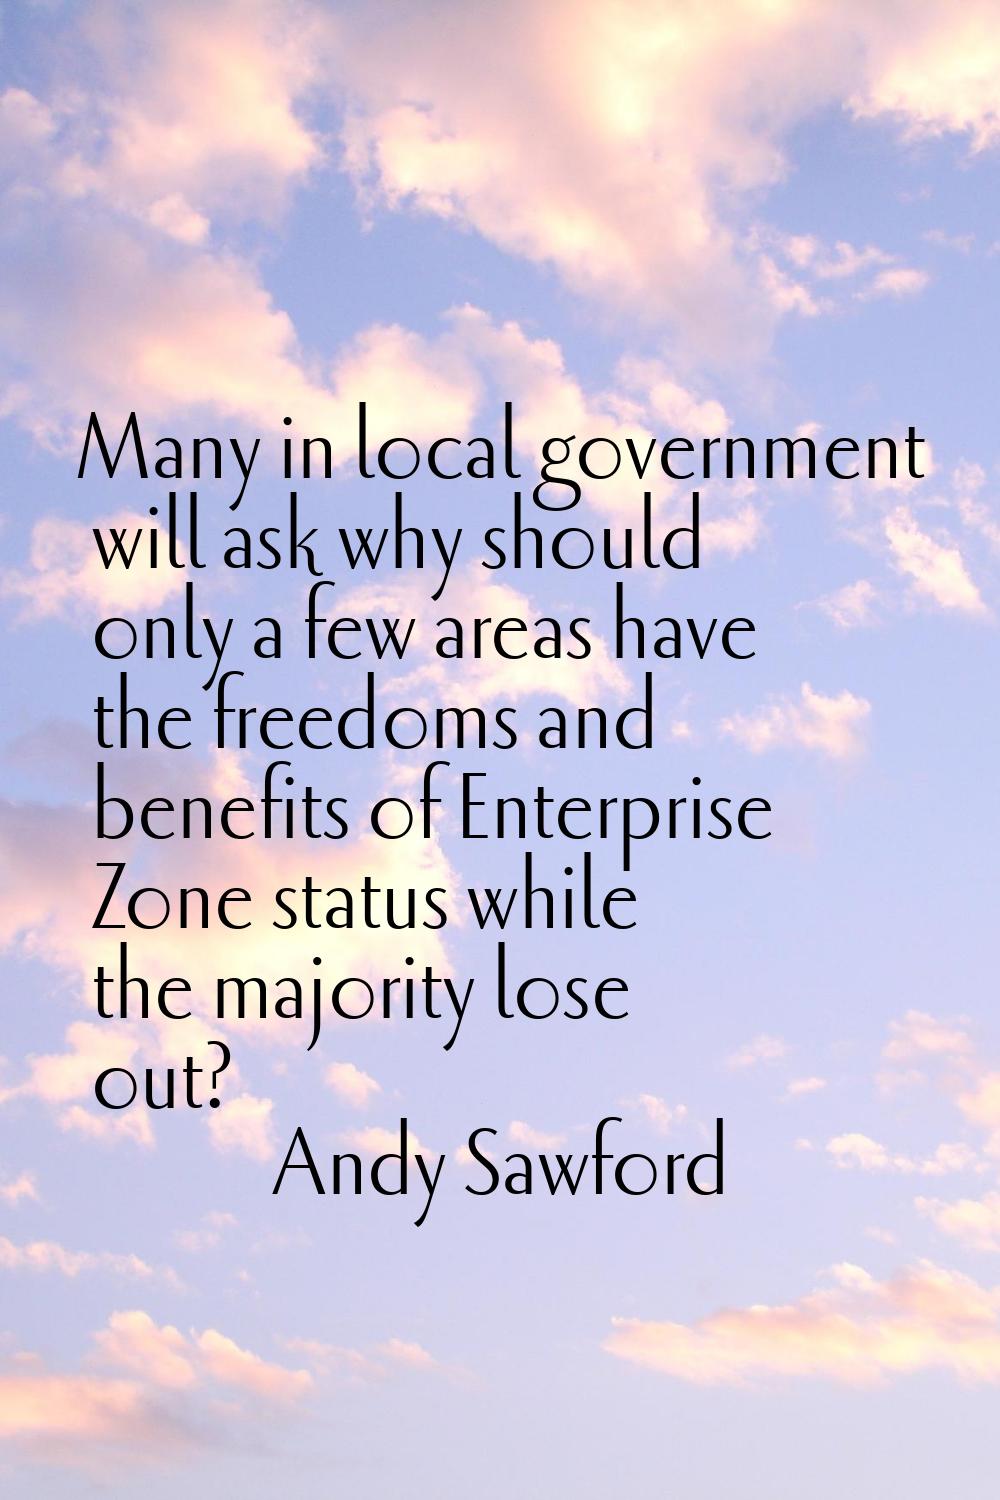 Many in local government will ask why should only a few areas have the freedoms and benefits of Ent